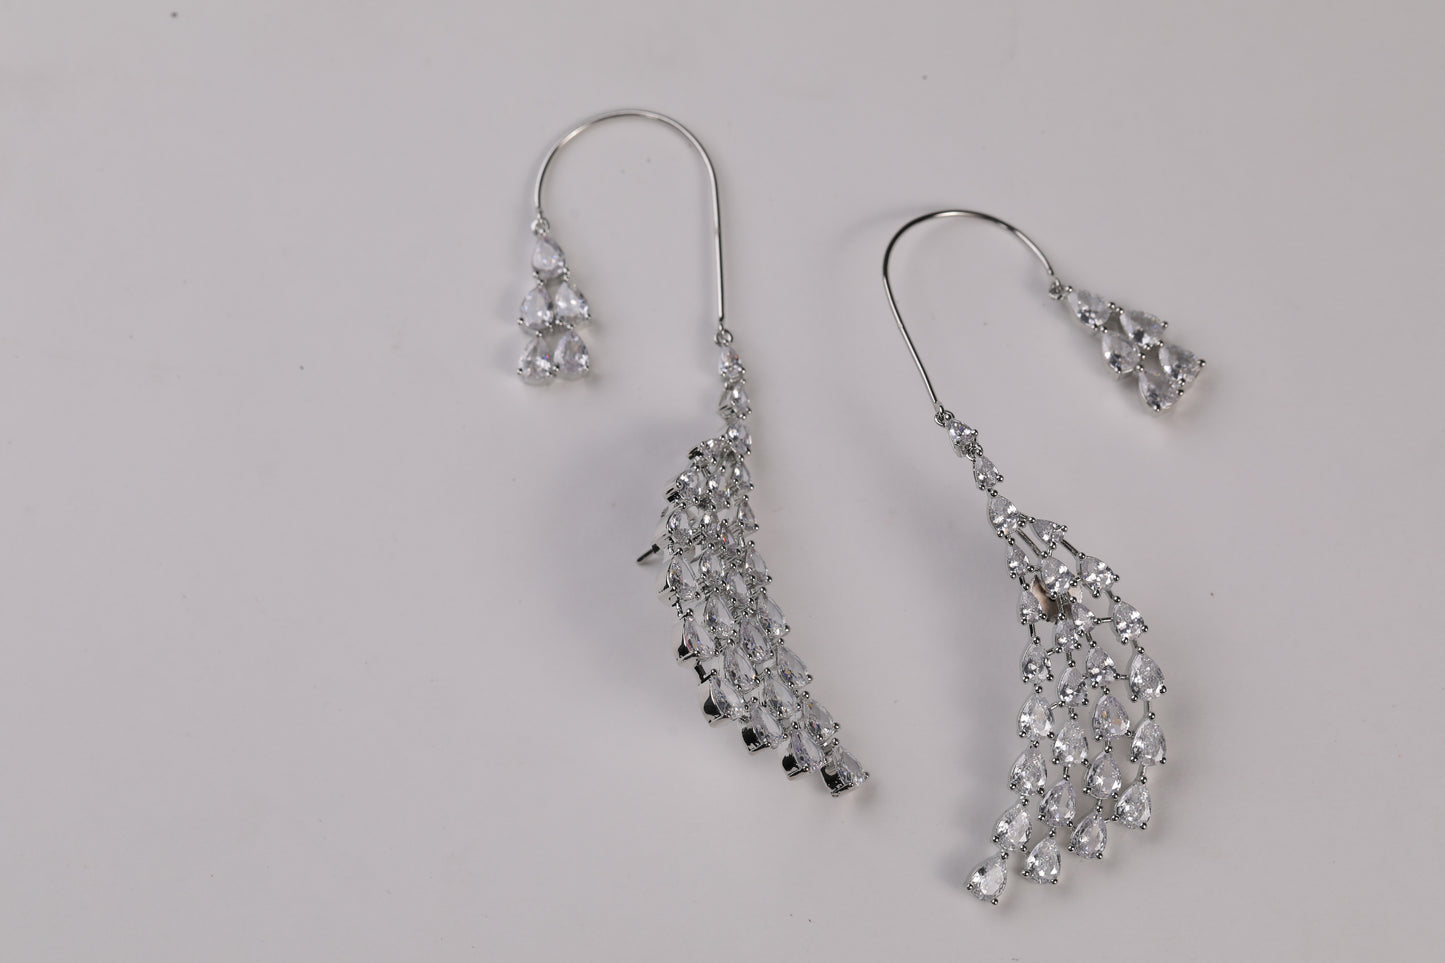 Stylish and Unique Design: Stand out from the crowd with these one-of-a-kind ear cuff drop earrings